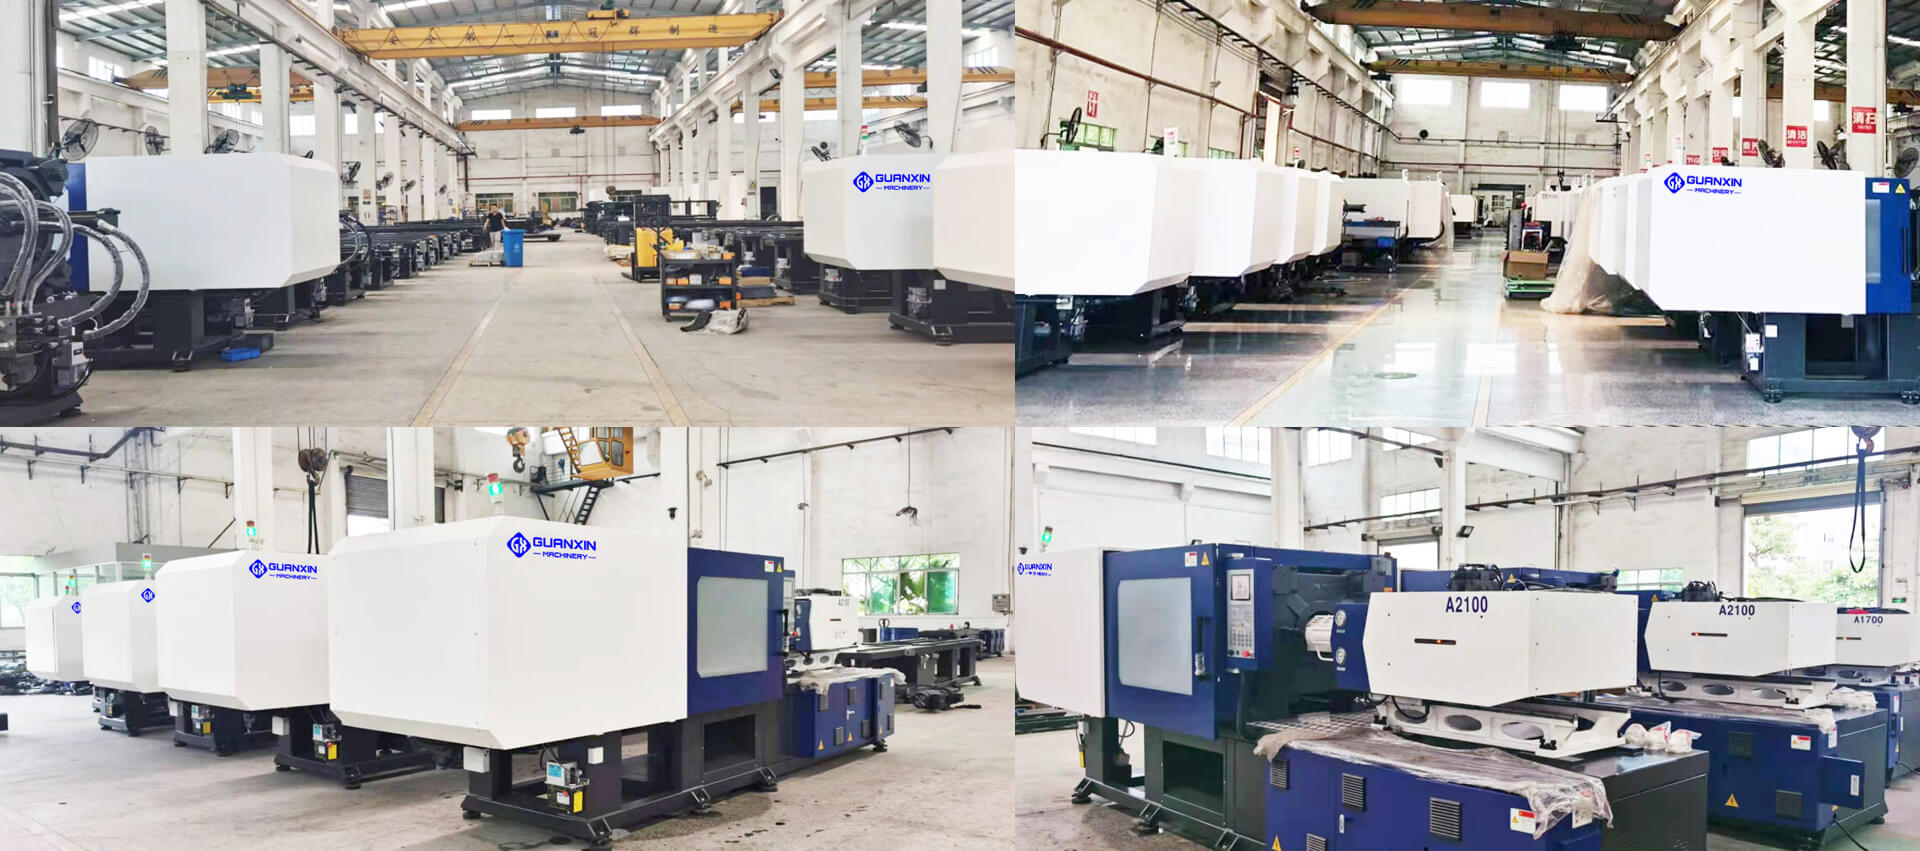 Guanxin Machinery Workshop_injection molding machine manufacturer in China